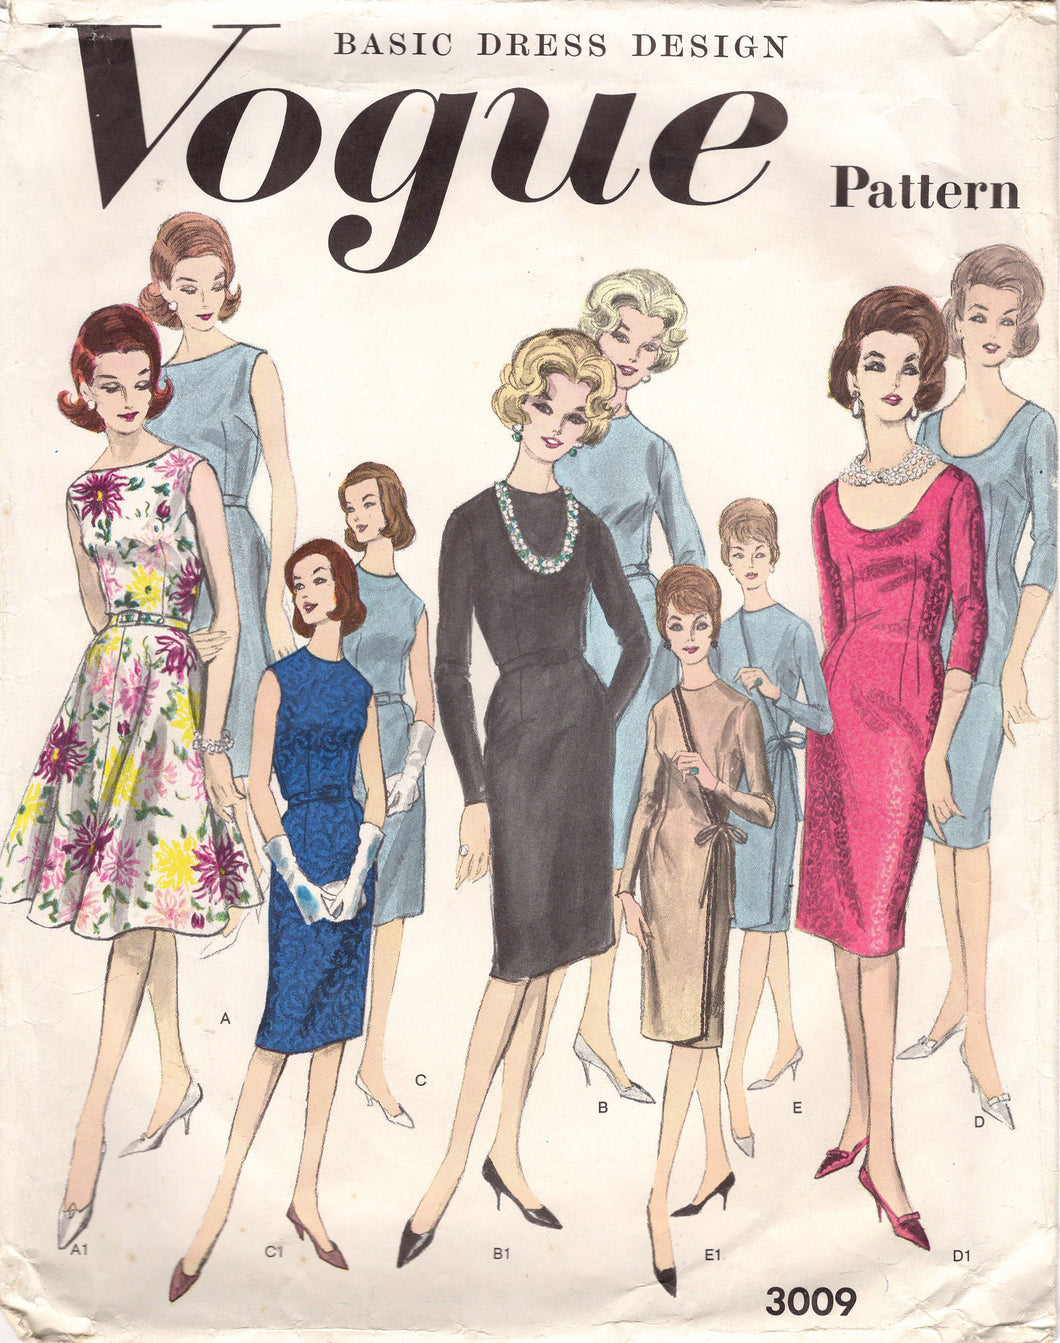 1960's Vogue Basic Design Sheath, Crossover Front or Fit and Flare Dress Pattern - Bust 34